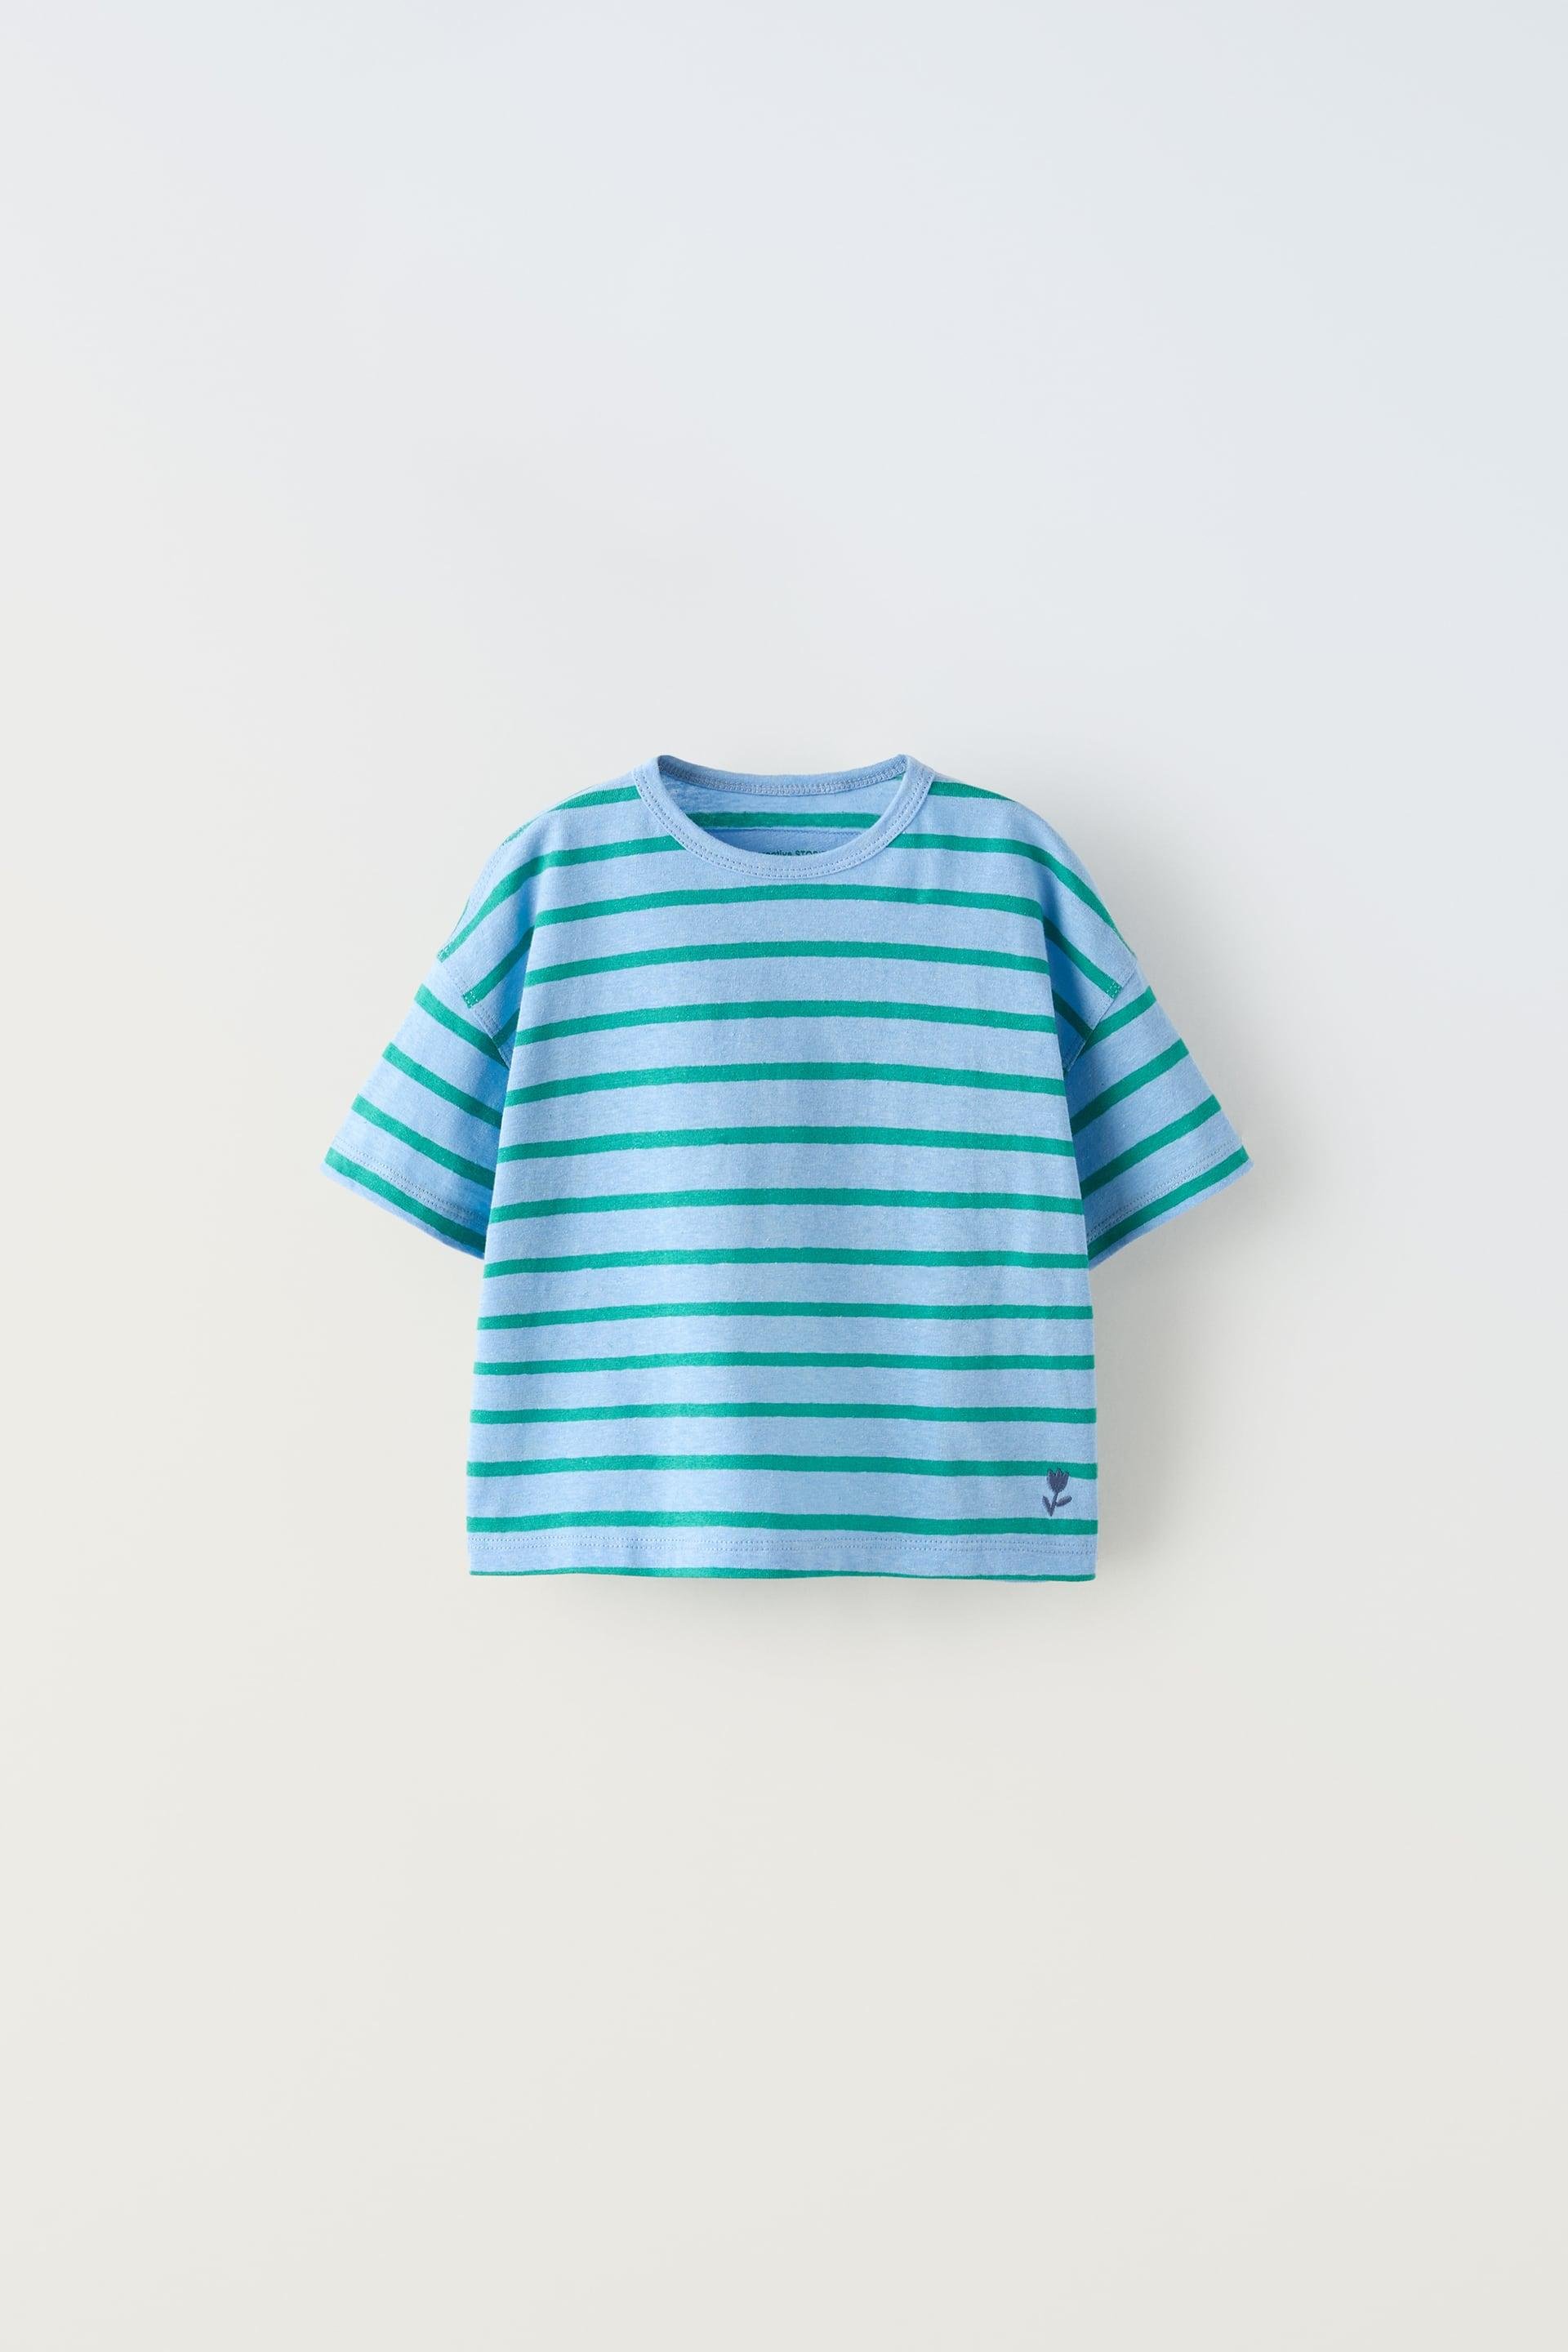 WOVEN EMBROIDERED STRIPED T-SHIRT by ZARA